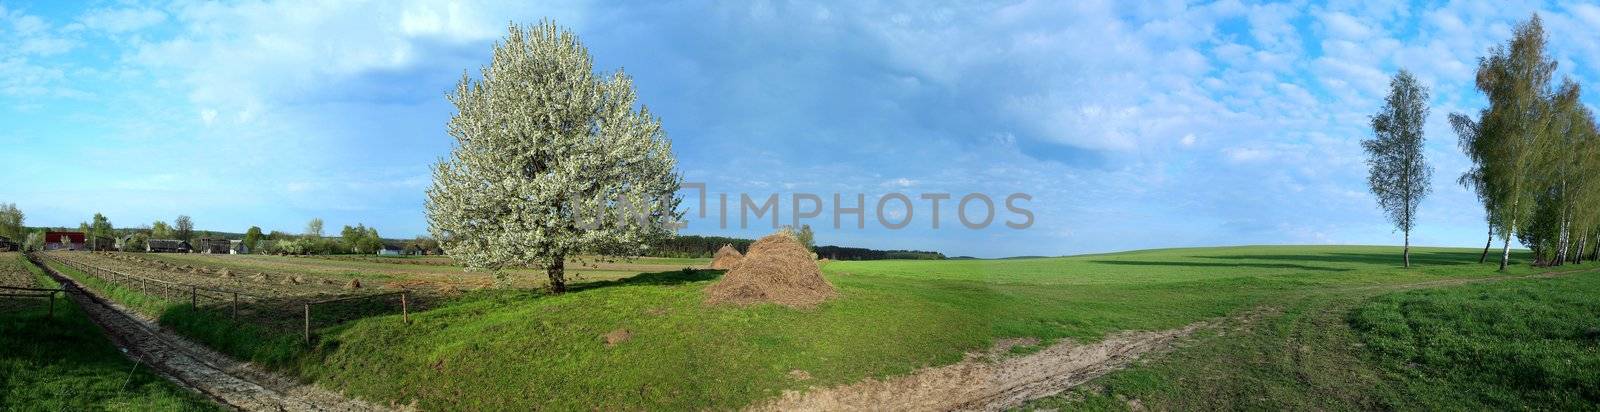 Panoramic image of a blooming tree in a field